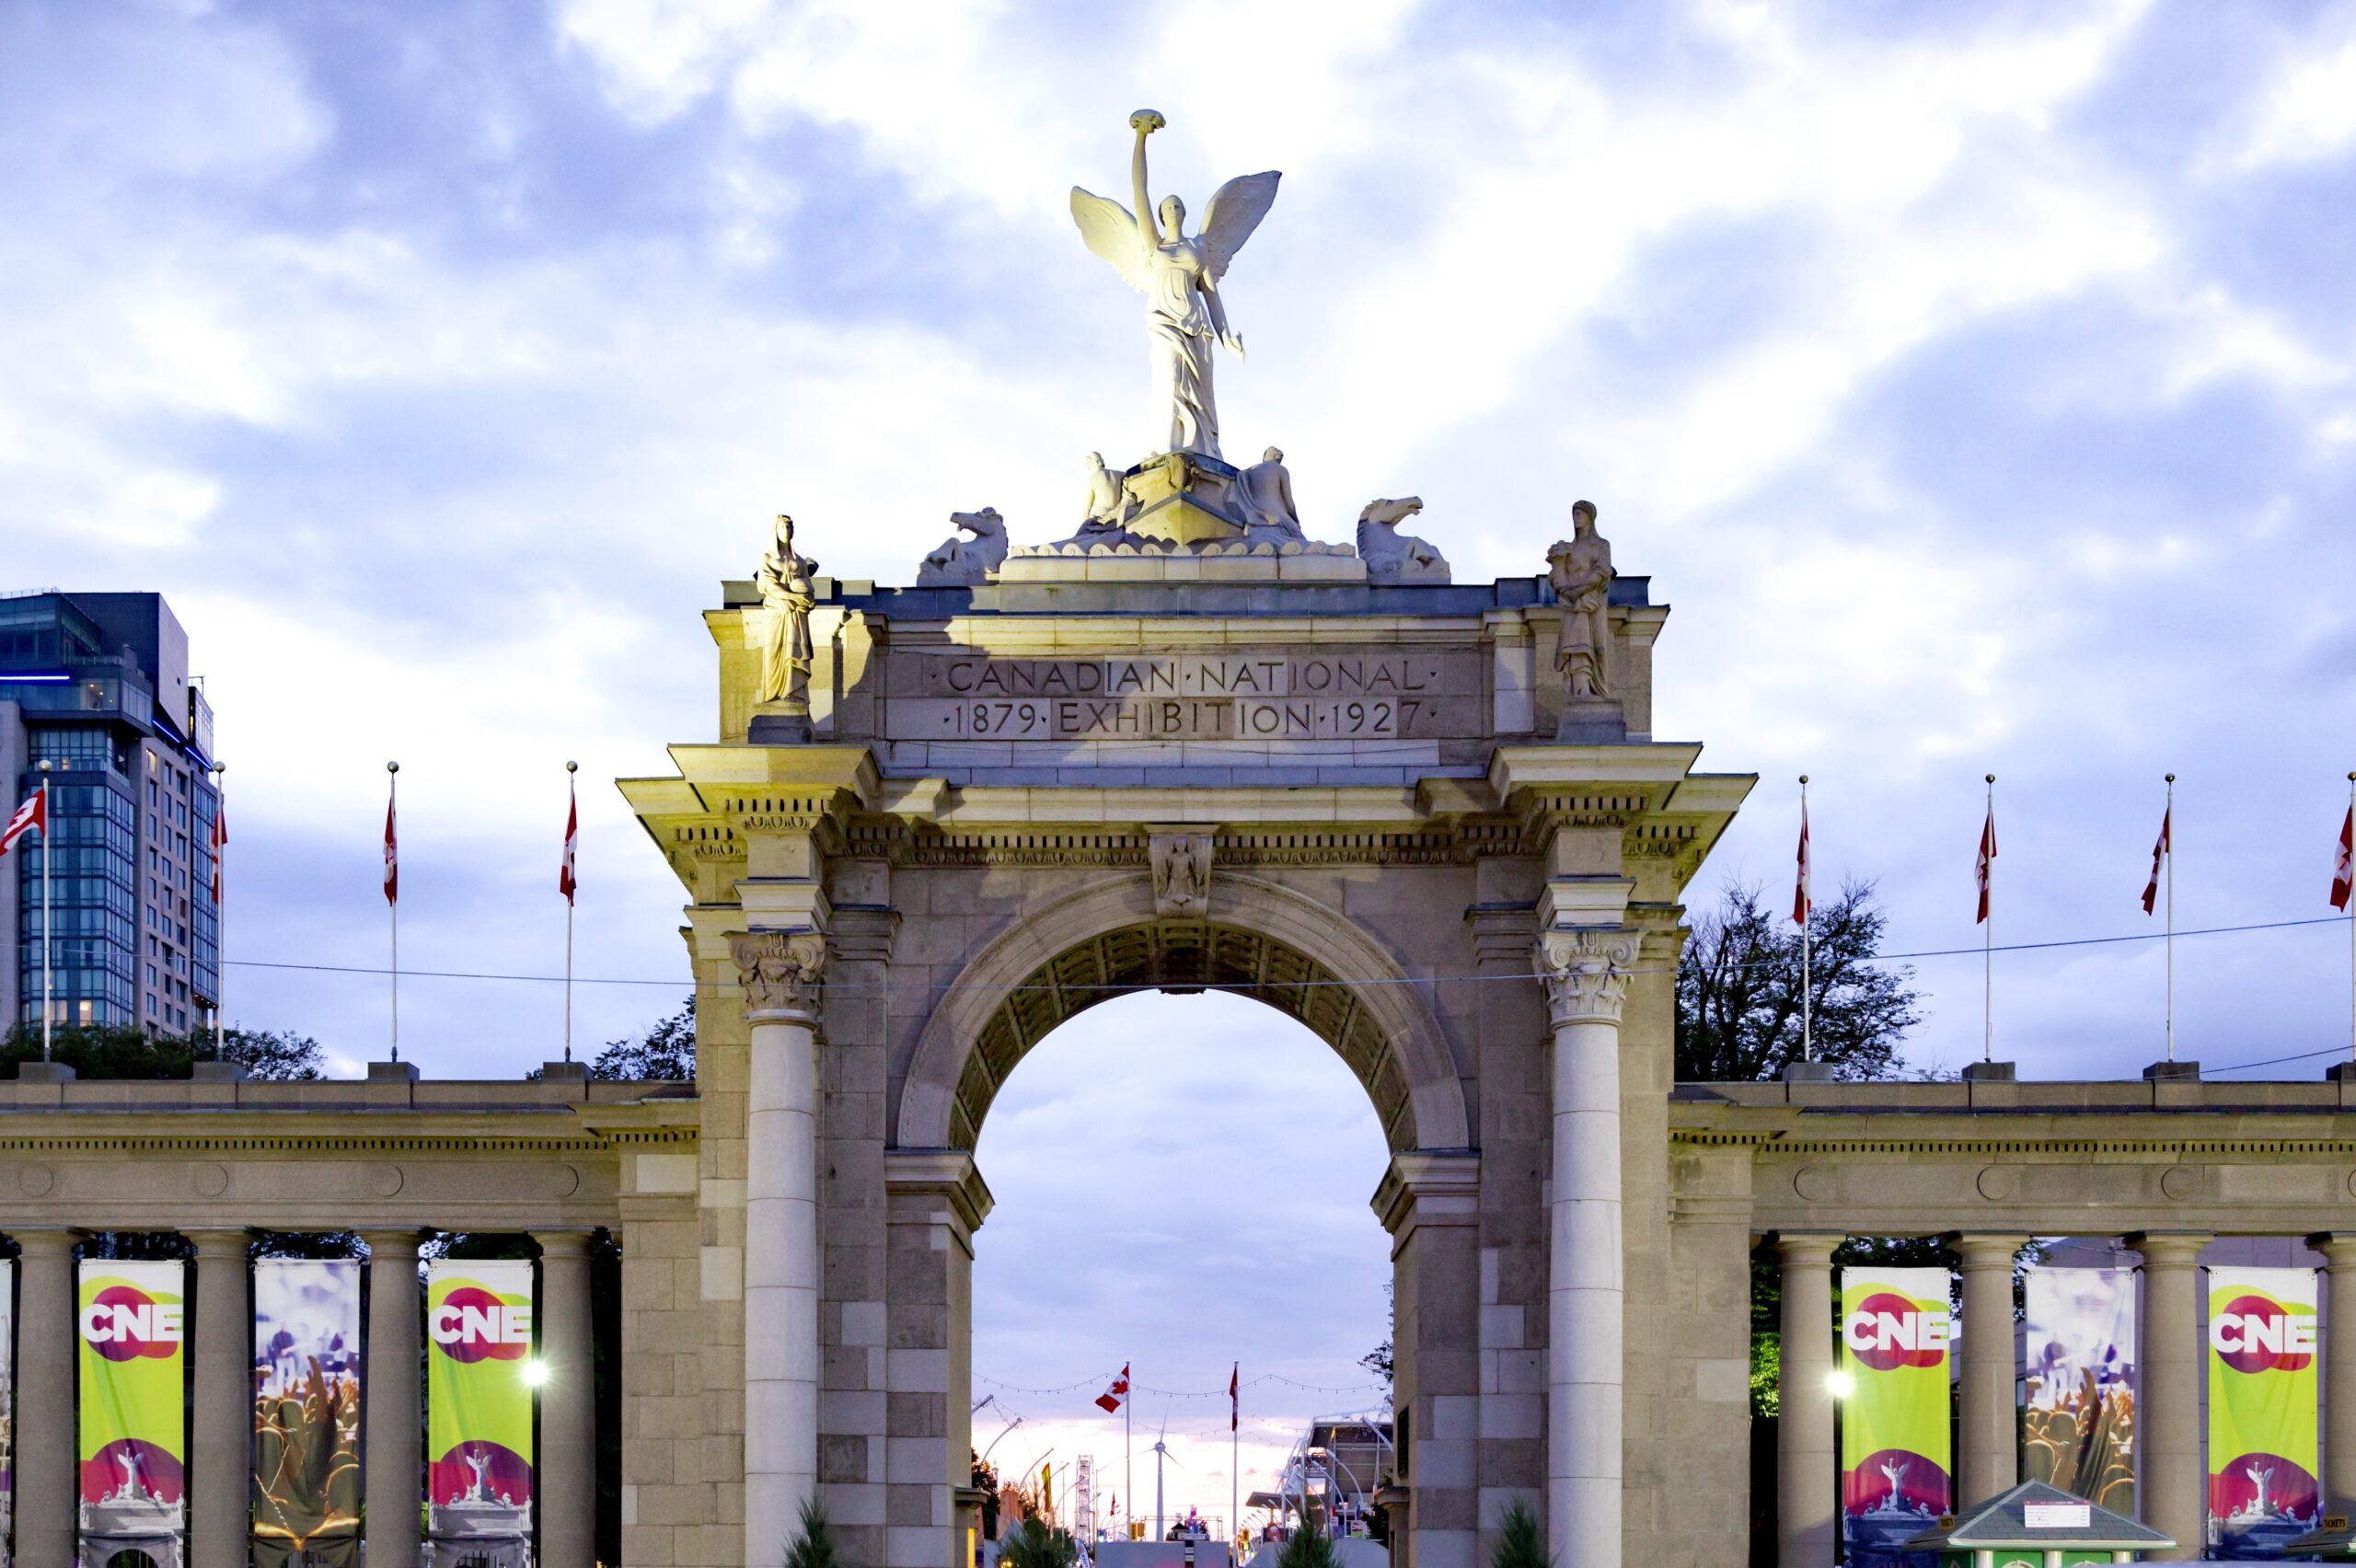 CNE gates in perfect view